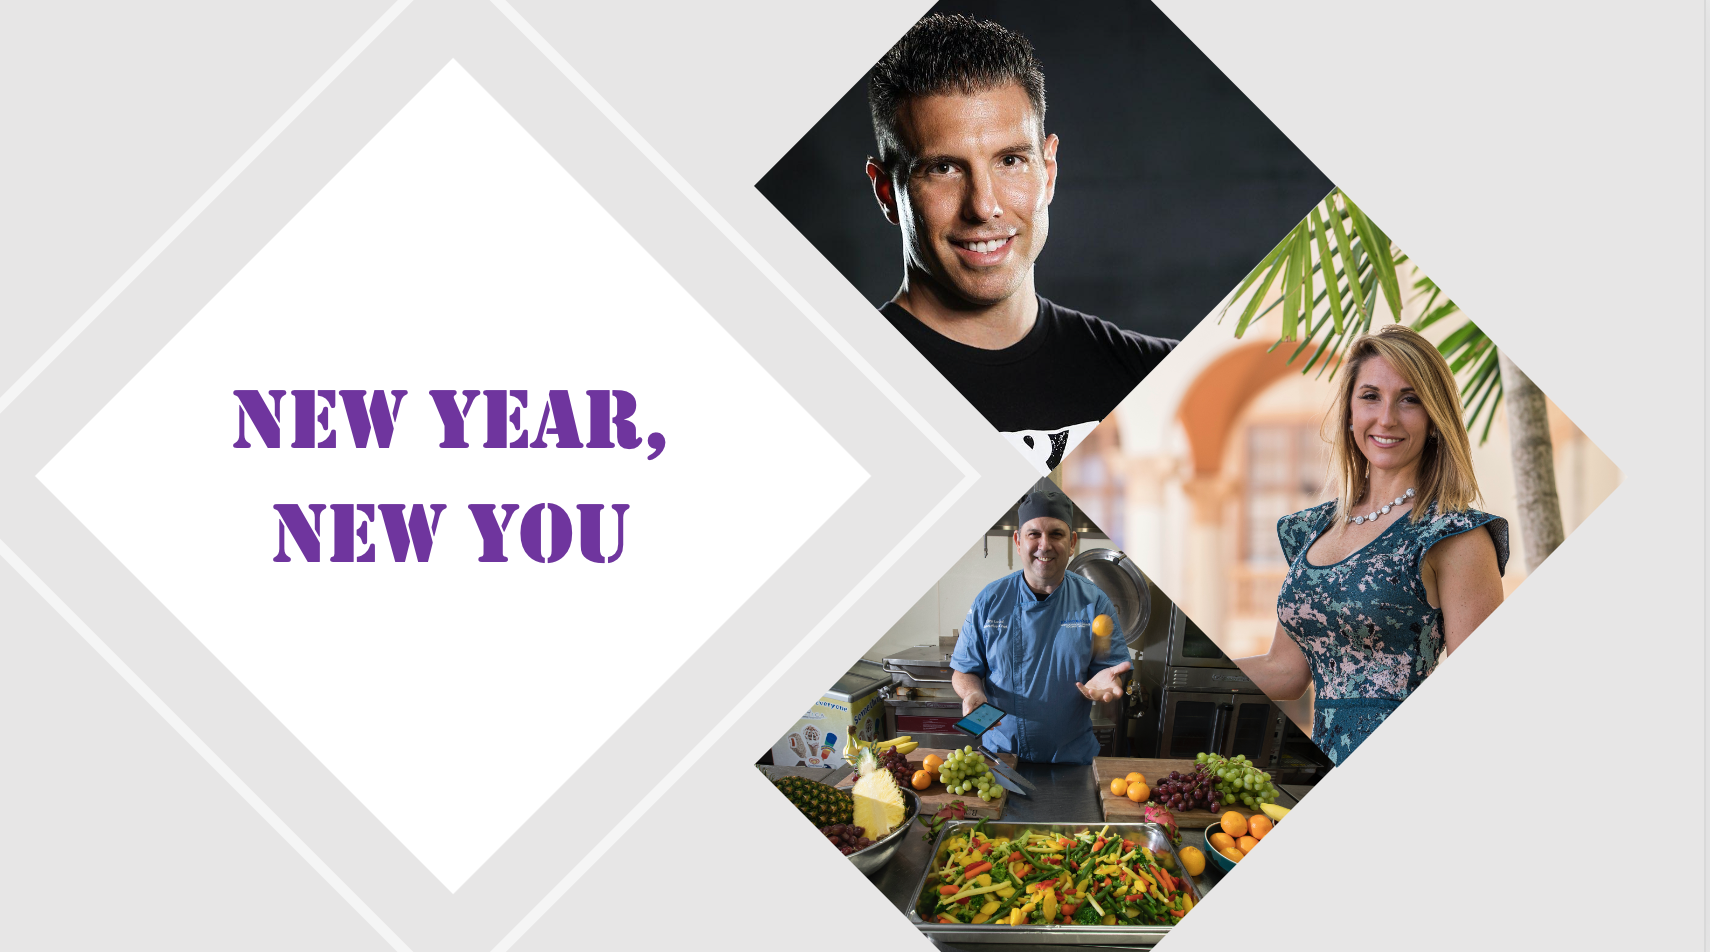 New Year, New You: the Power of Fitness, Nutrition & the Culinary Arts